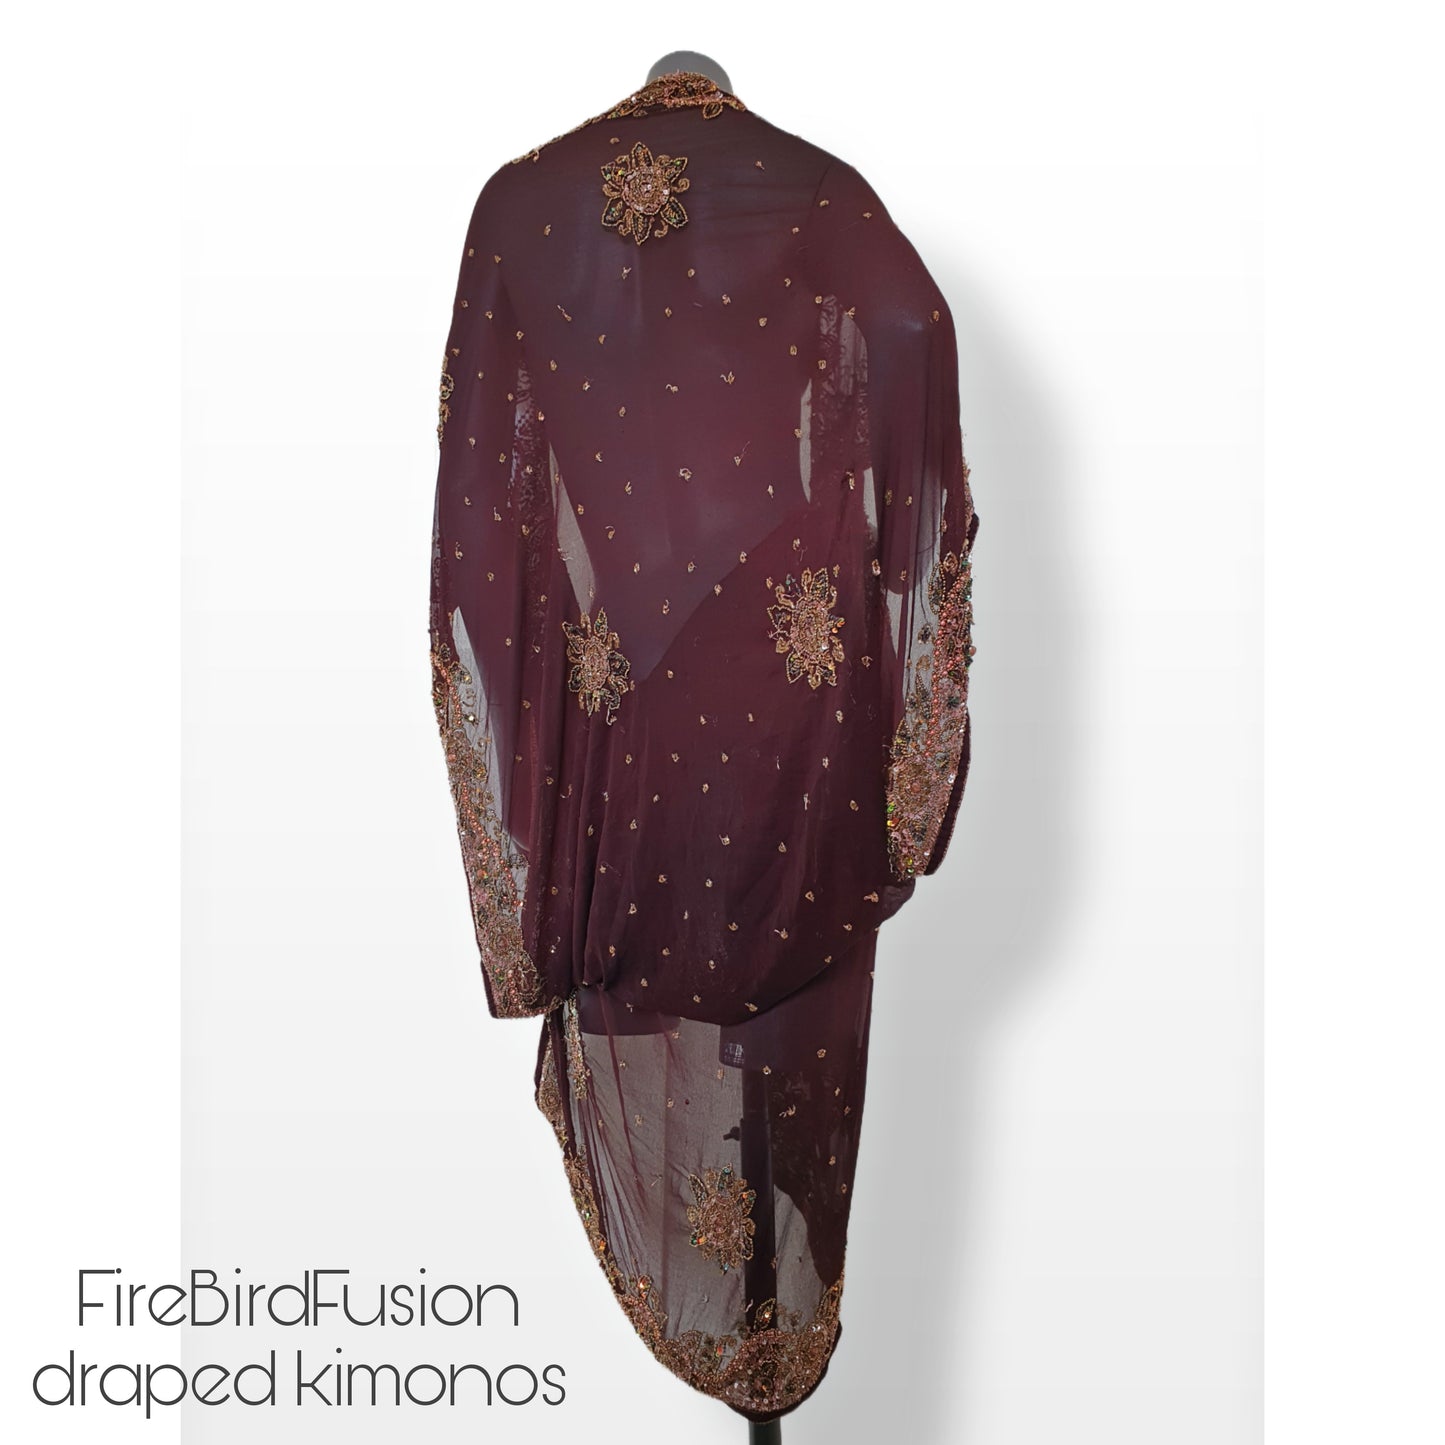 Draped chocolate brown kimono with elaborated hand embrodery in bronze and green (M)